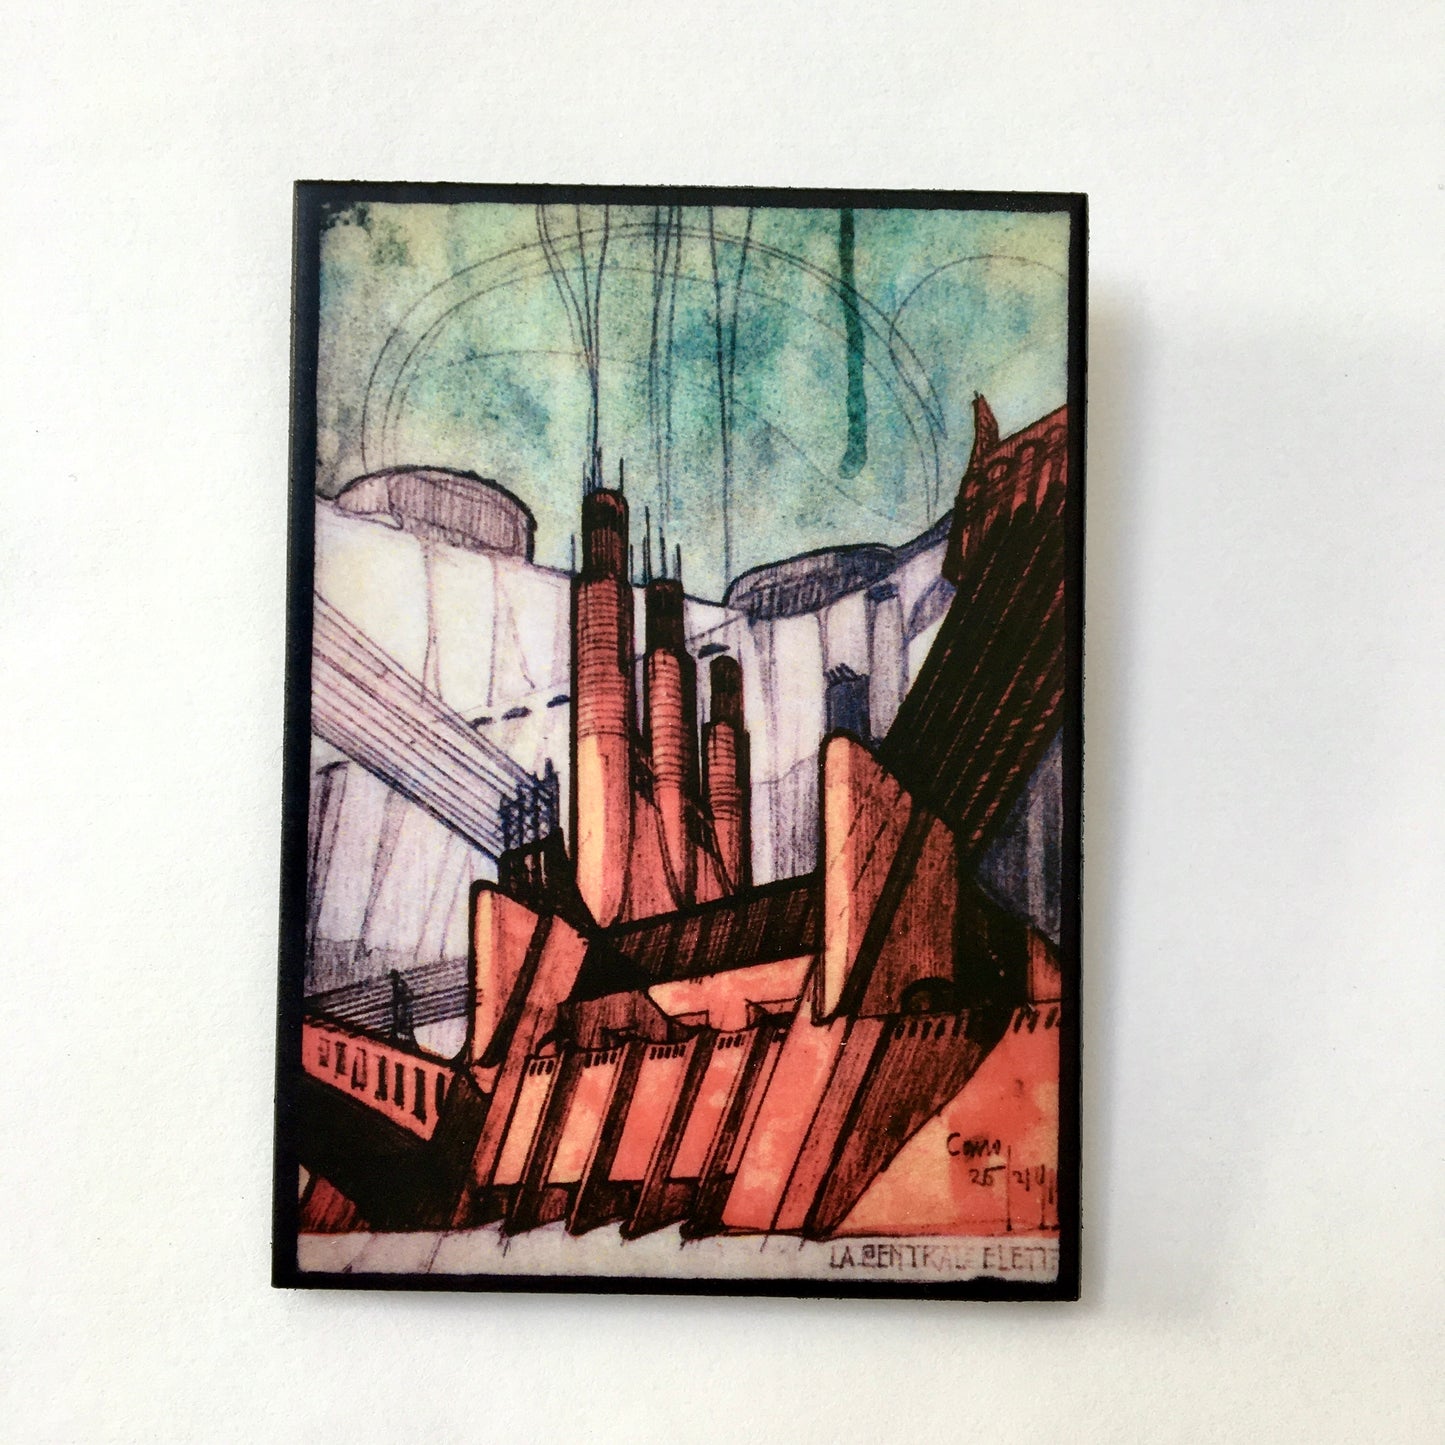 Futurist Architecture drawing by Antonio Sant’Elia, "The power station", part of the series La Città Nuova, 1914., on top of this  sustainable wood brooch designed and handmade by Obljewellery, architectural gift.